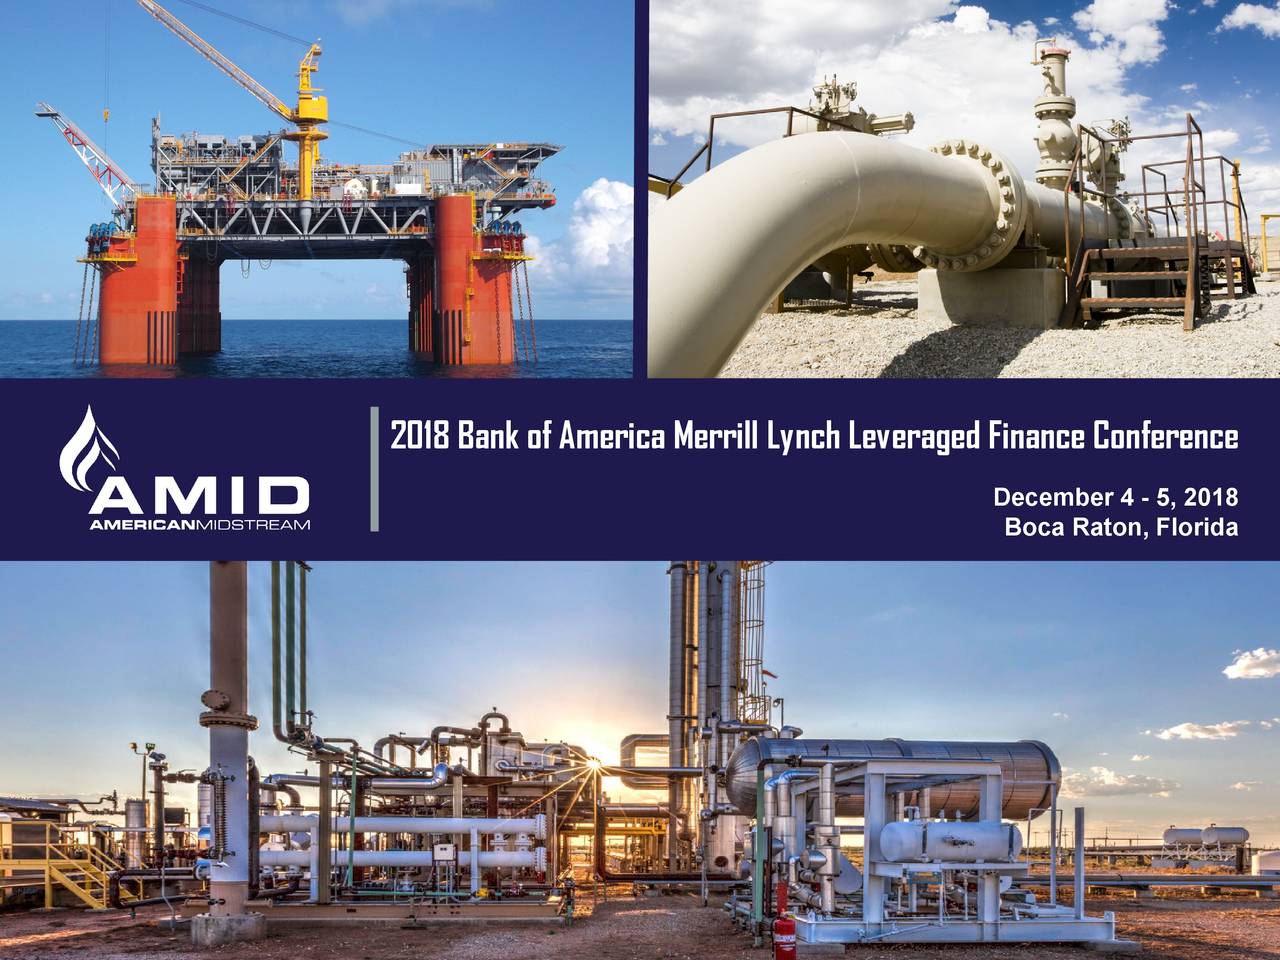 2018 Bank of America Merrill Lynch Leveraged Finance Conference